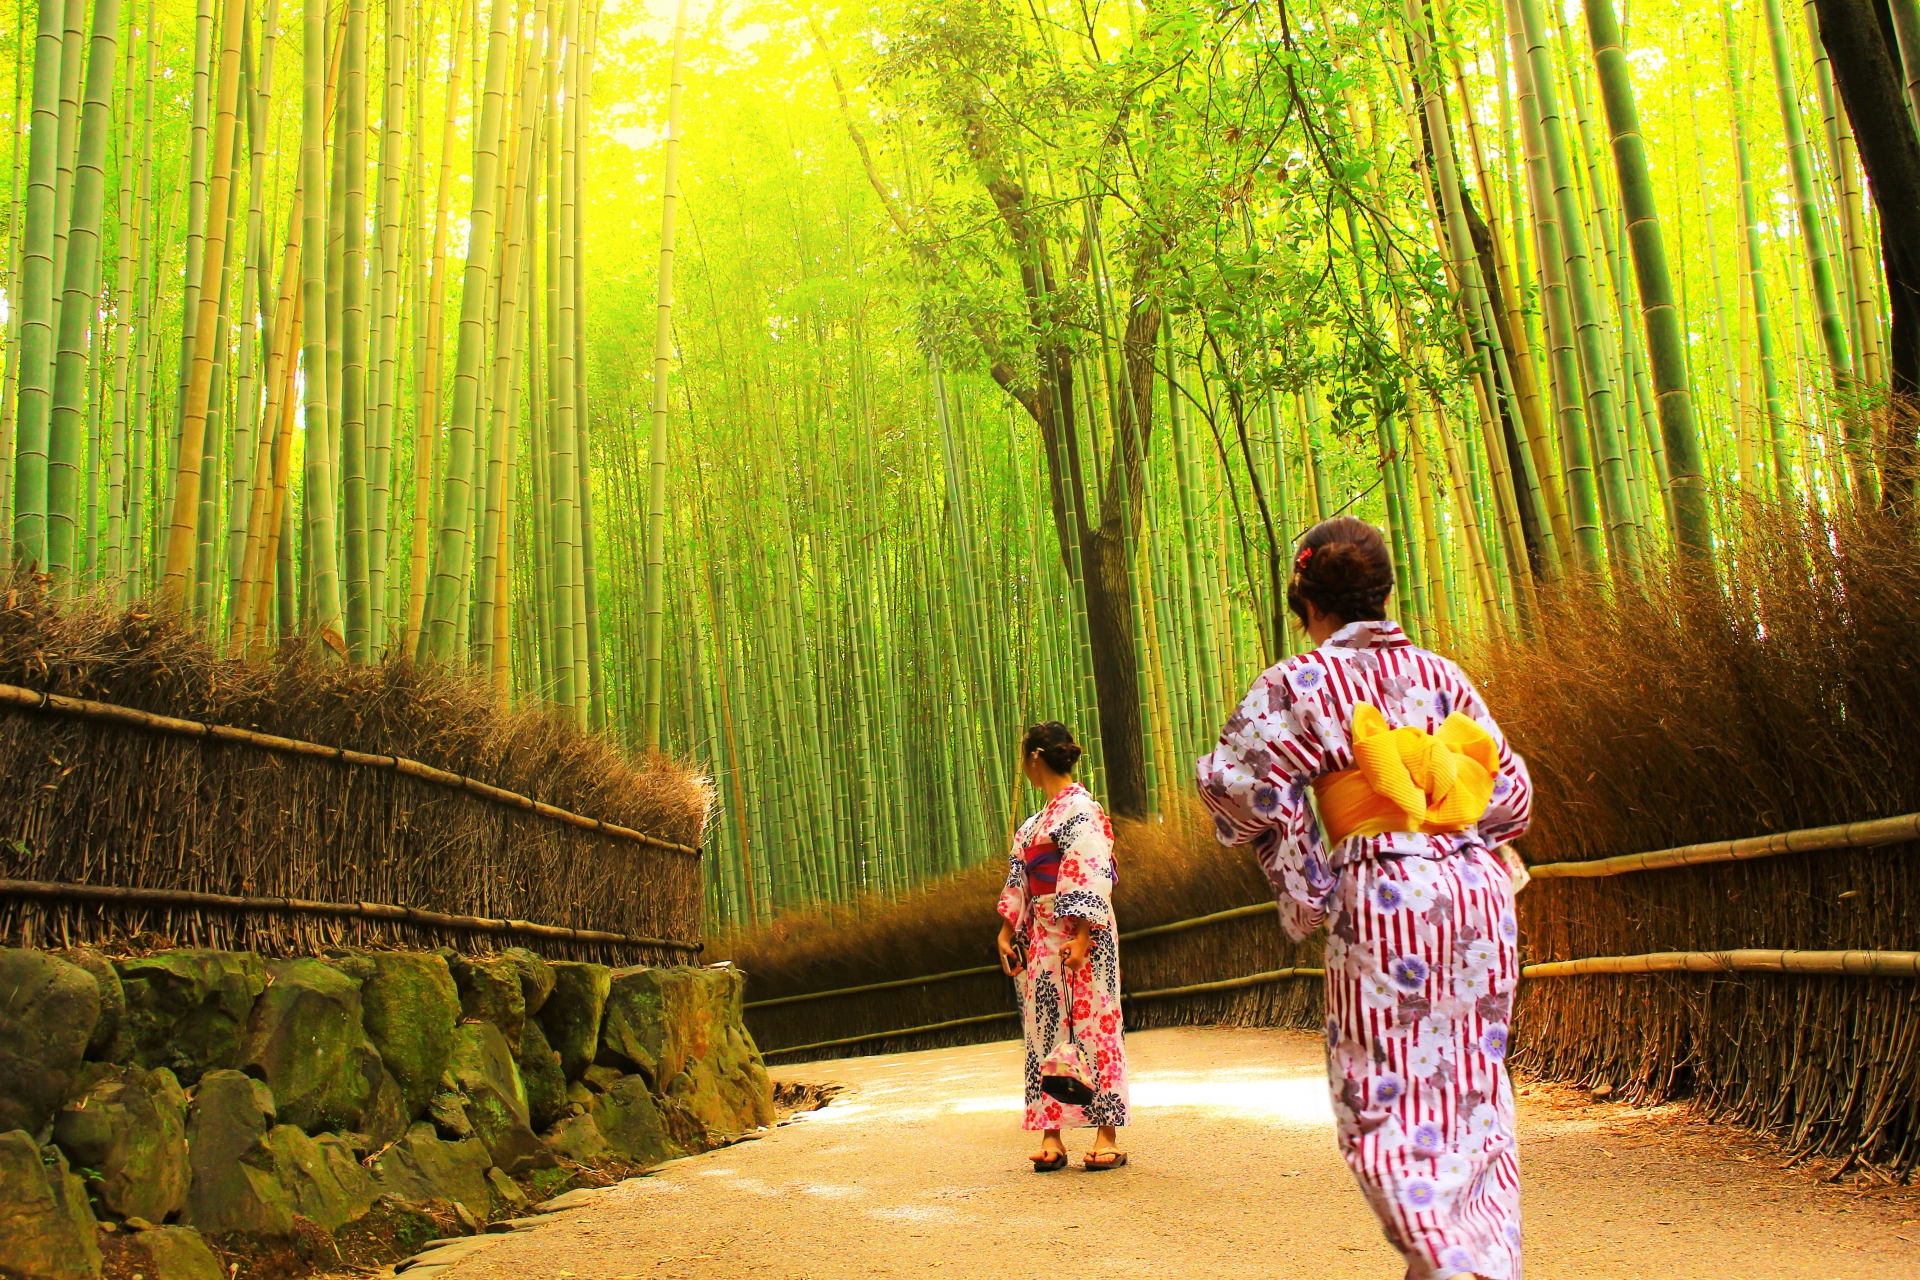 The Town of Bamboo Groves